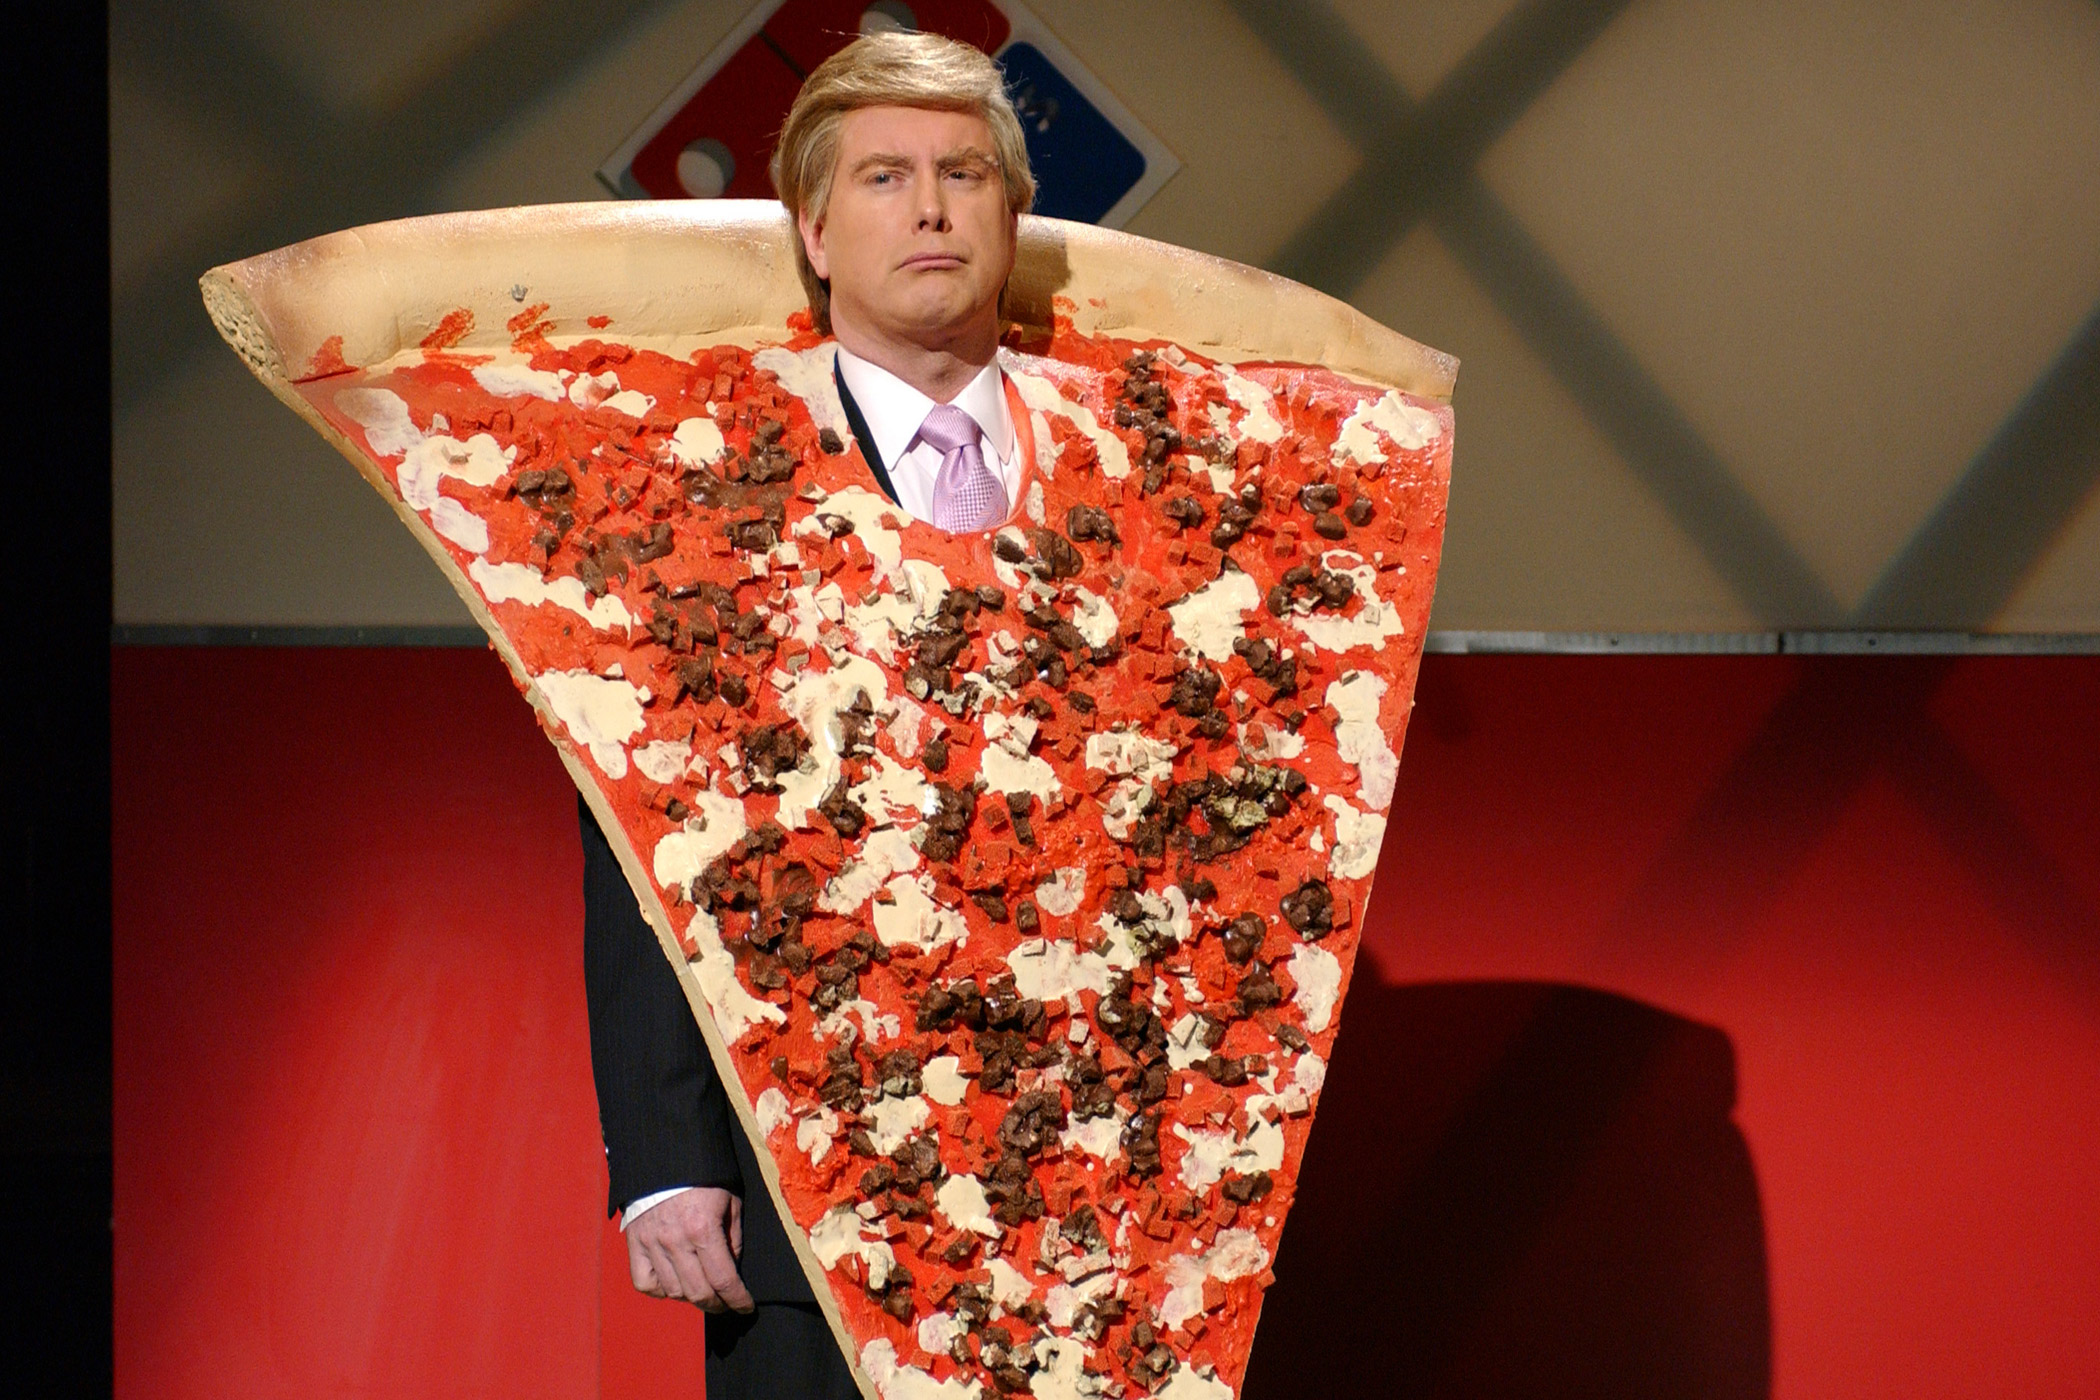 SNL's 'Domino's Ad Shoot' skit from May 7, 2005, featured Darrell Hammond as Donald Trump.